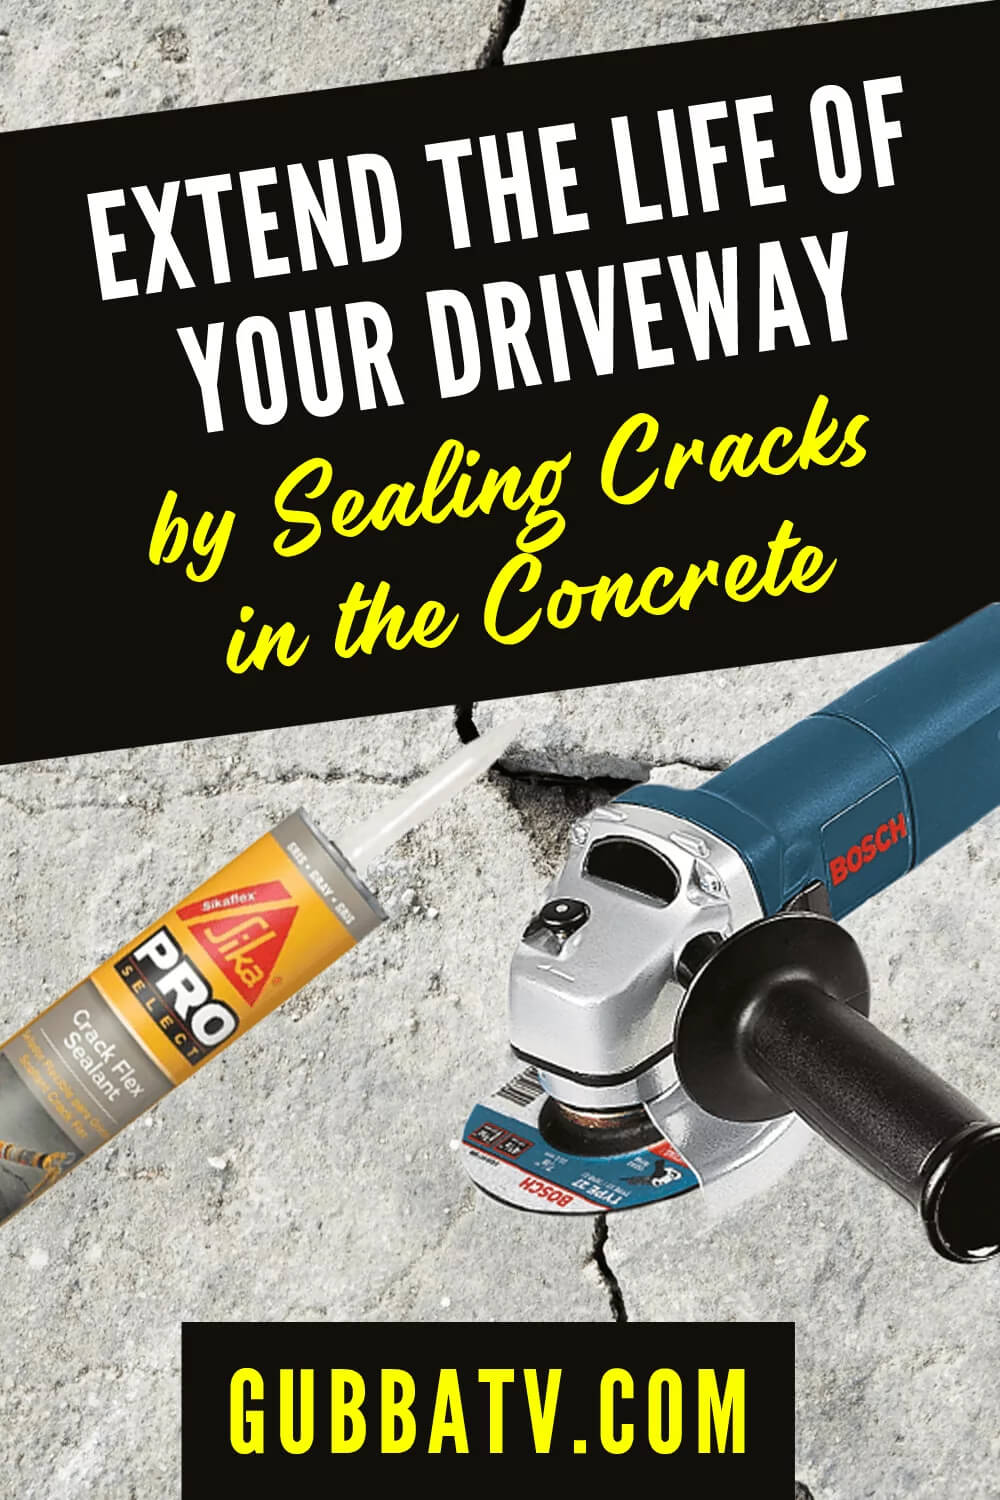 Extend the Life of Your Driveway by Sealing Cracks in the Concrete